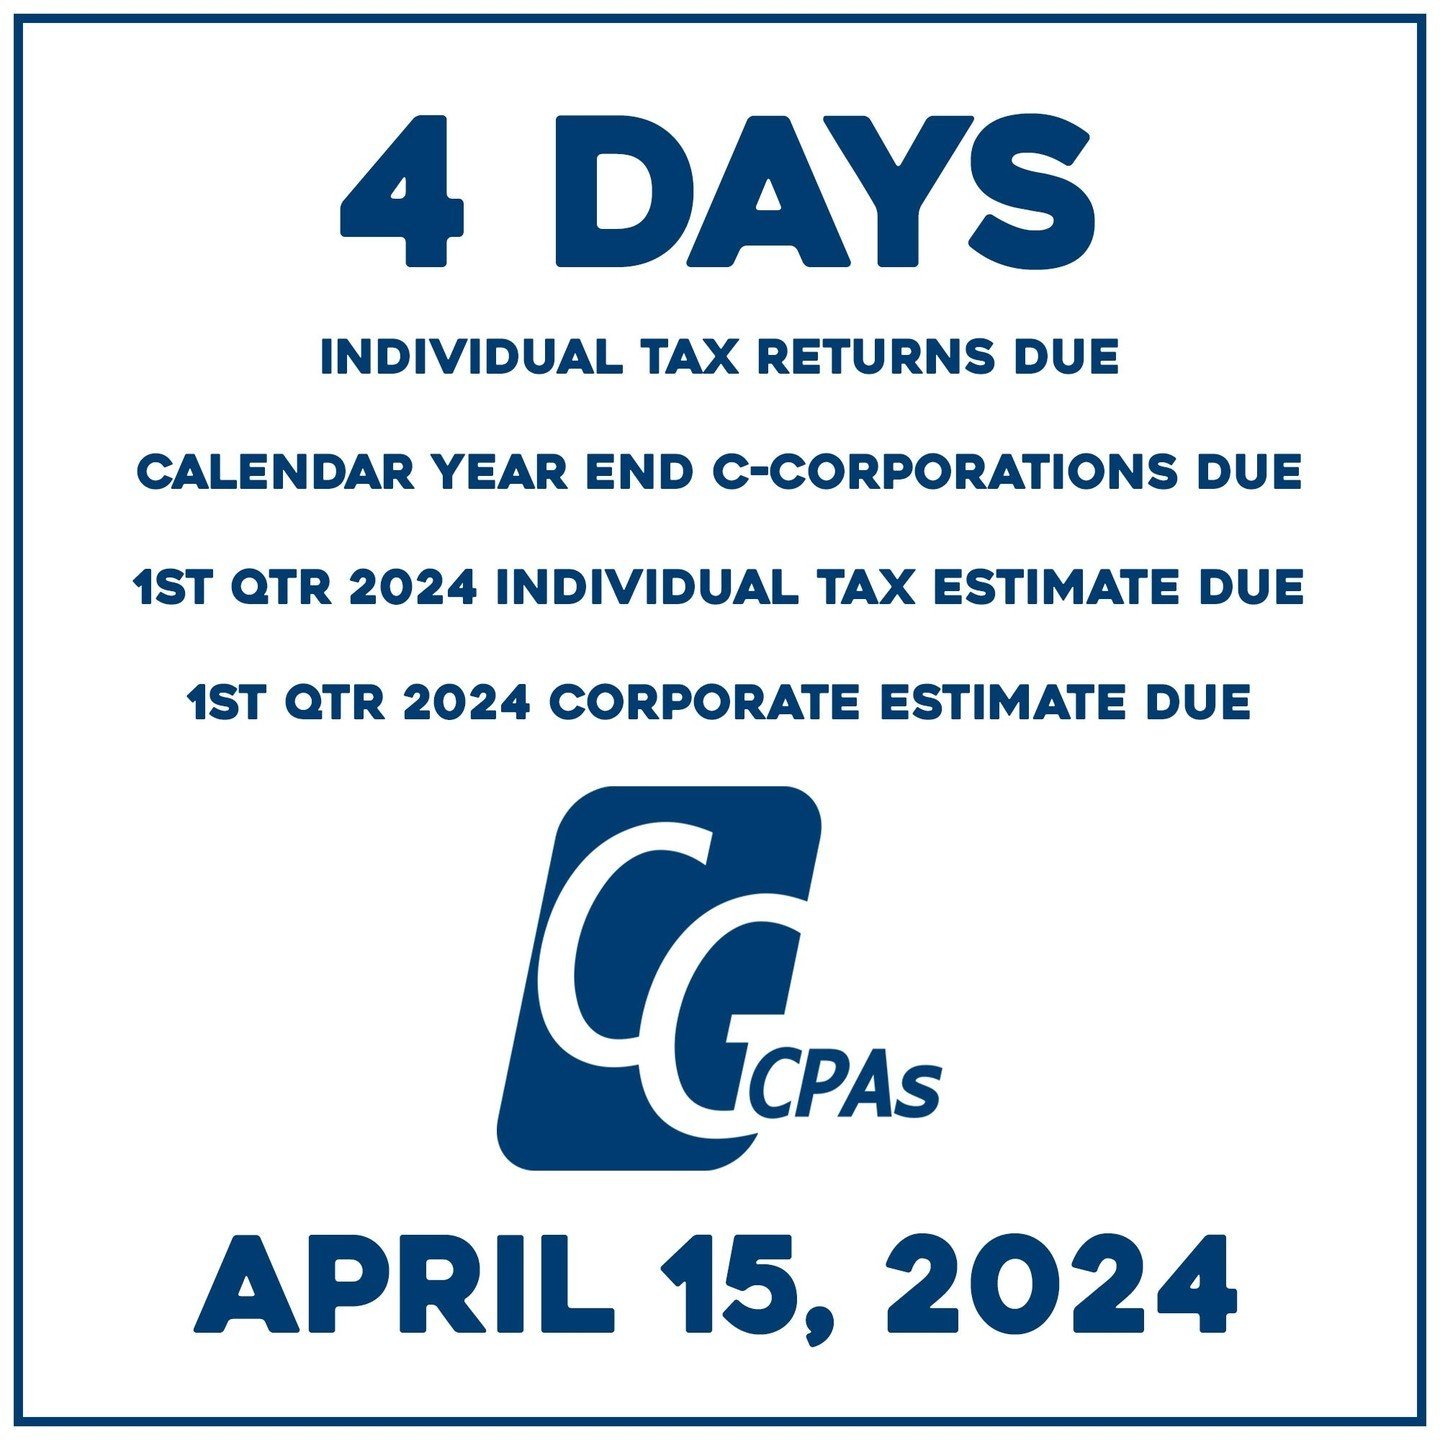 There are 4 days until Individual Tax Returns, Calendar Year End C-Corporations, 1st Quarter 2024 Individual Tax Estimates, and 1st Quarter 2024 Corporate Estimate are due.